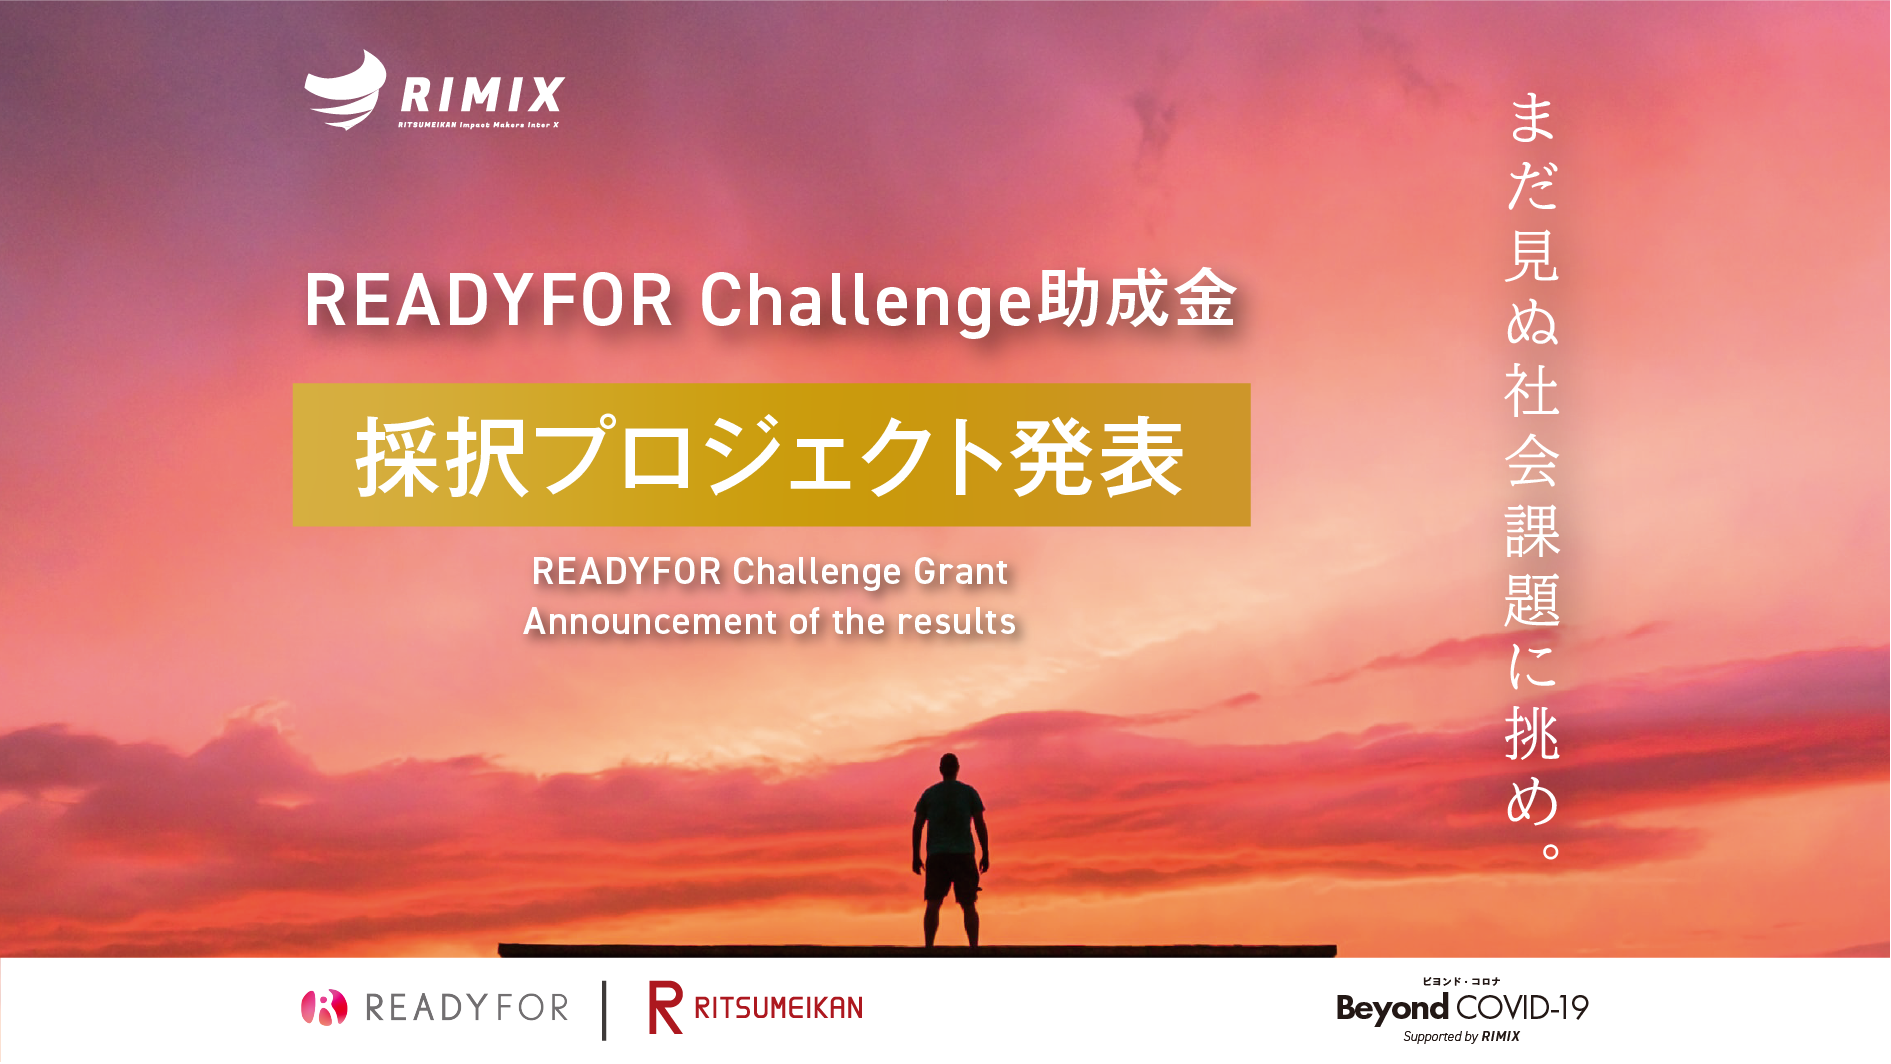 READYFOR Challenge助成金 採択プロジェクト発表 – READYFOR Challenge Grant Announcement of the results